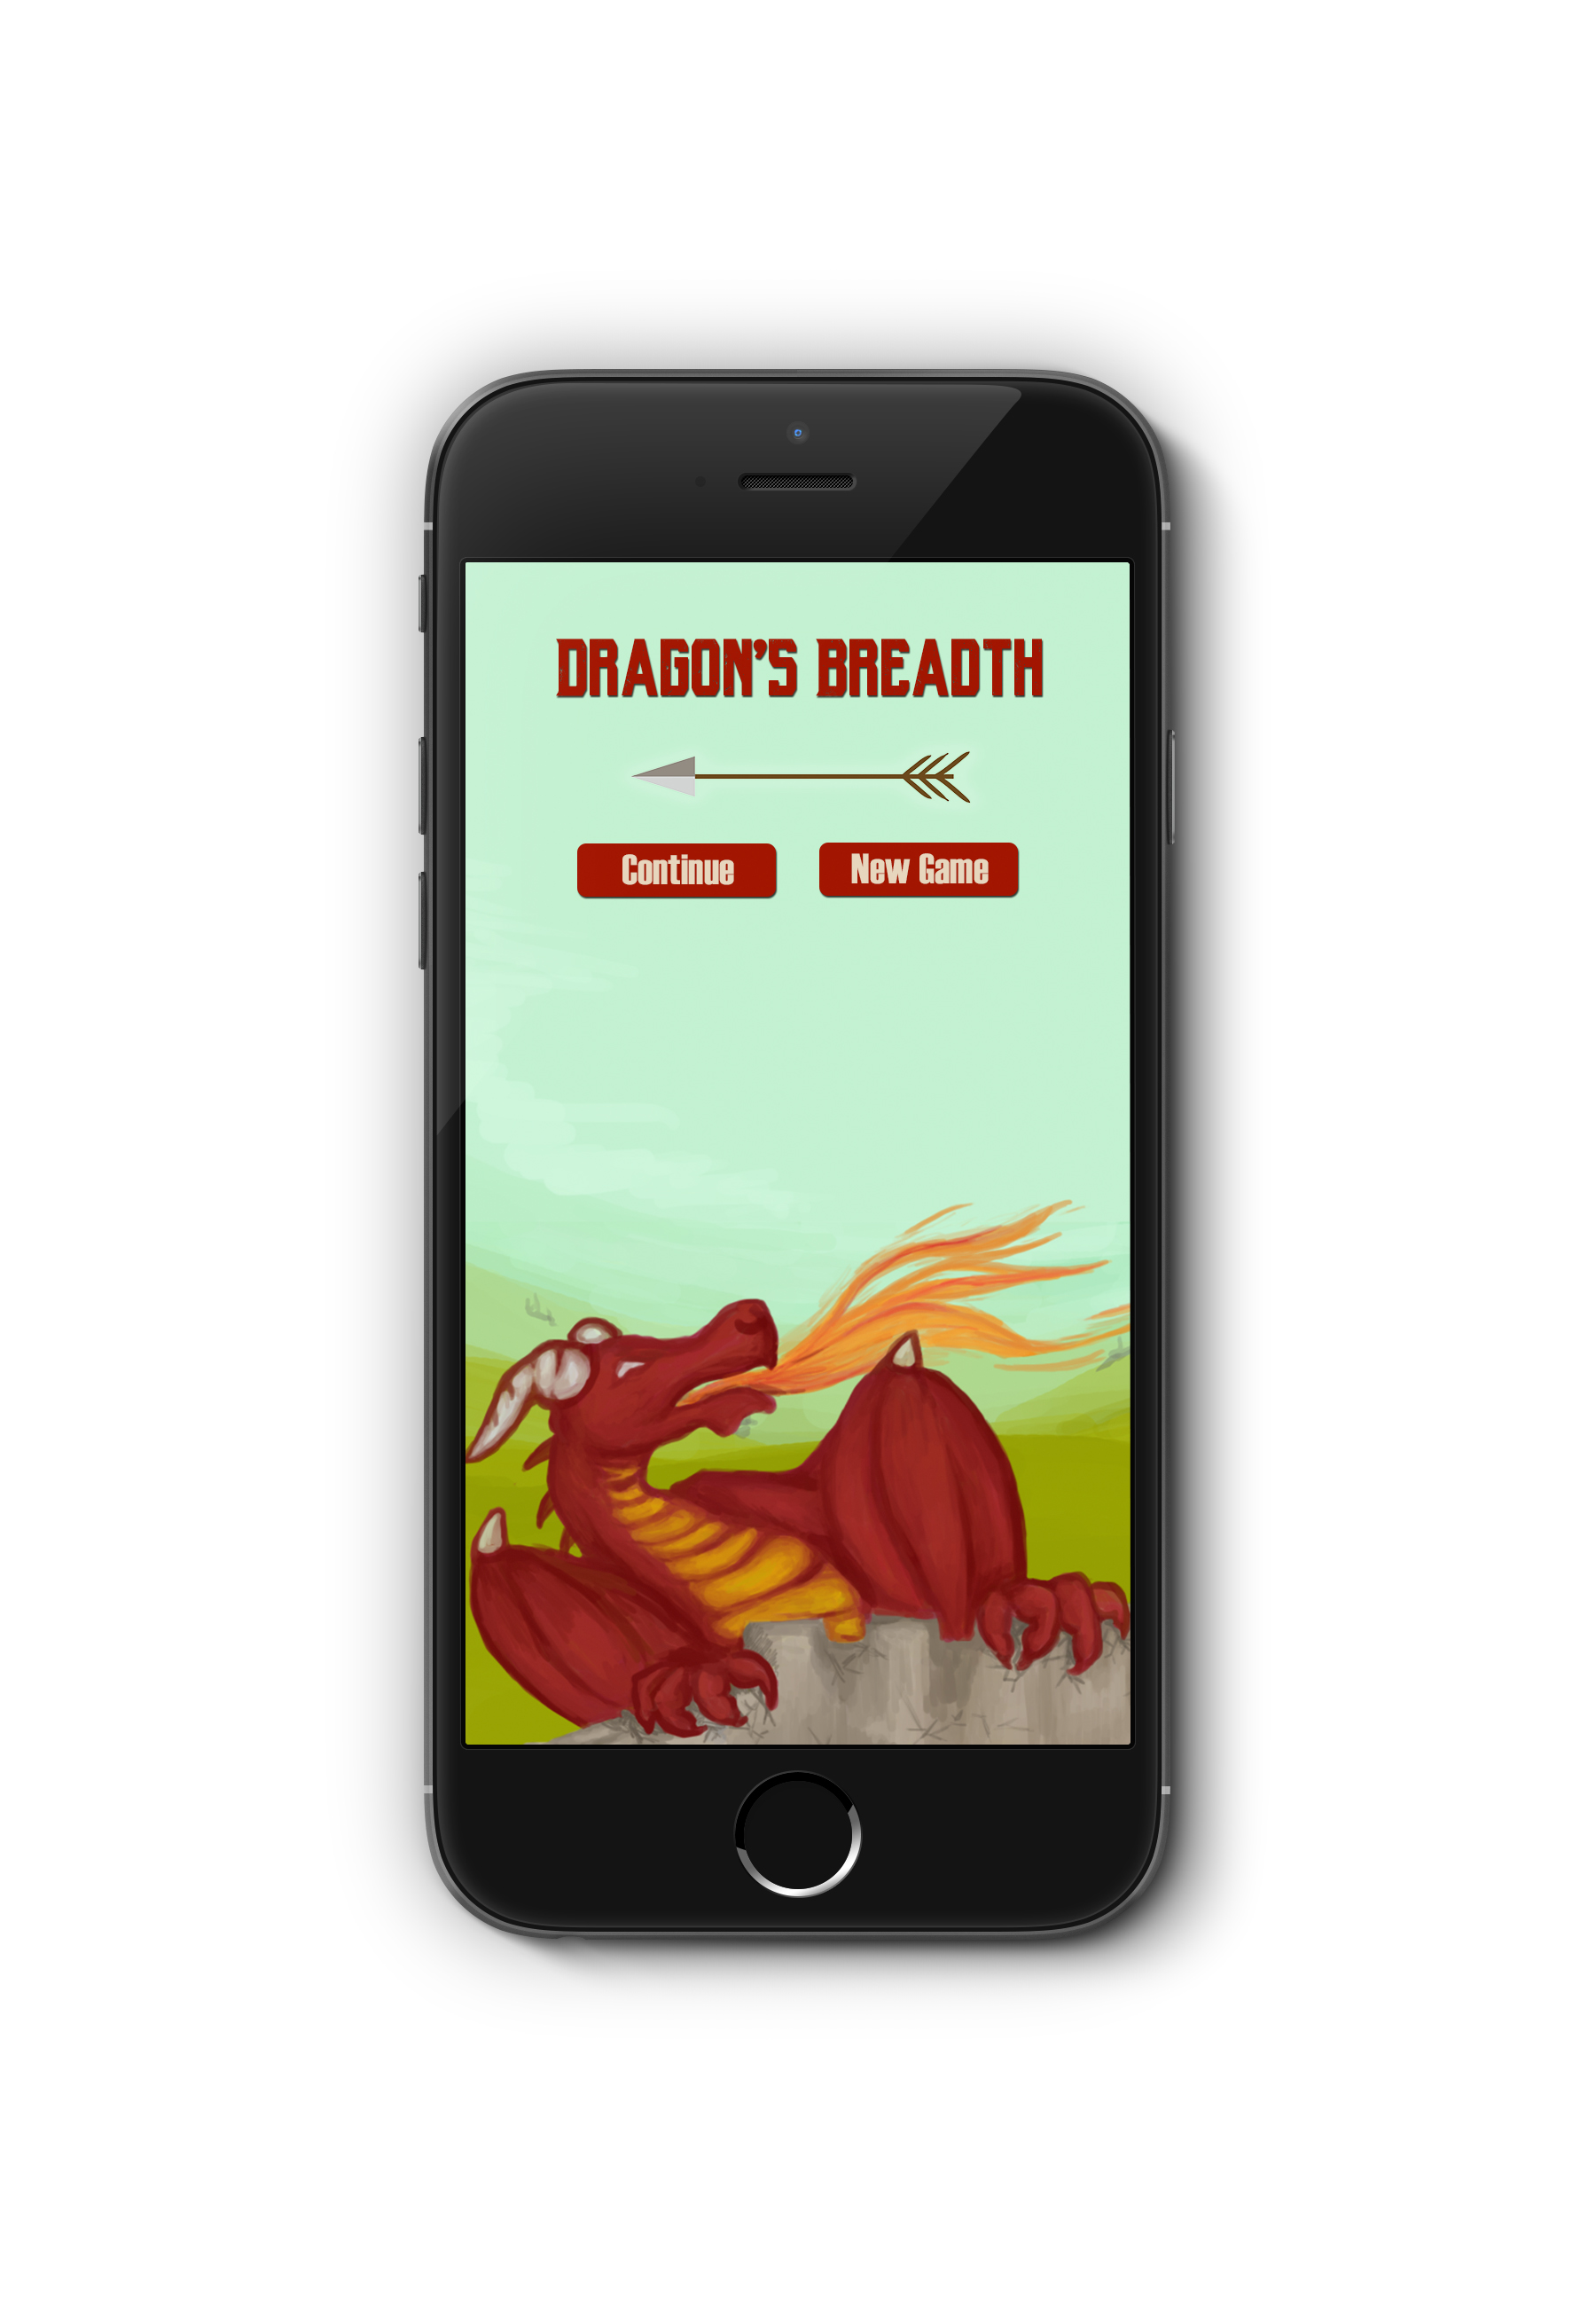   Dragon's Breadth  is a collaborative project between a team of designers and programmers for Cornell's Advanced Game Design class. (2016) 